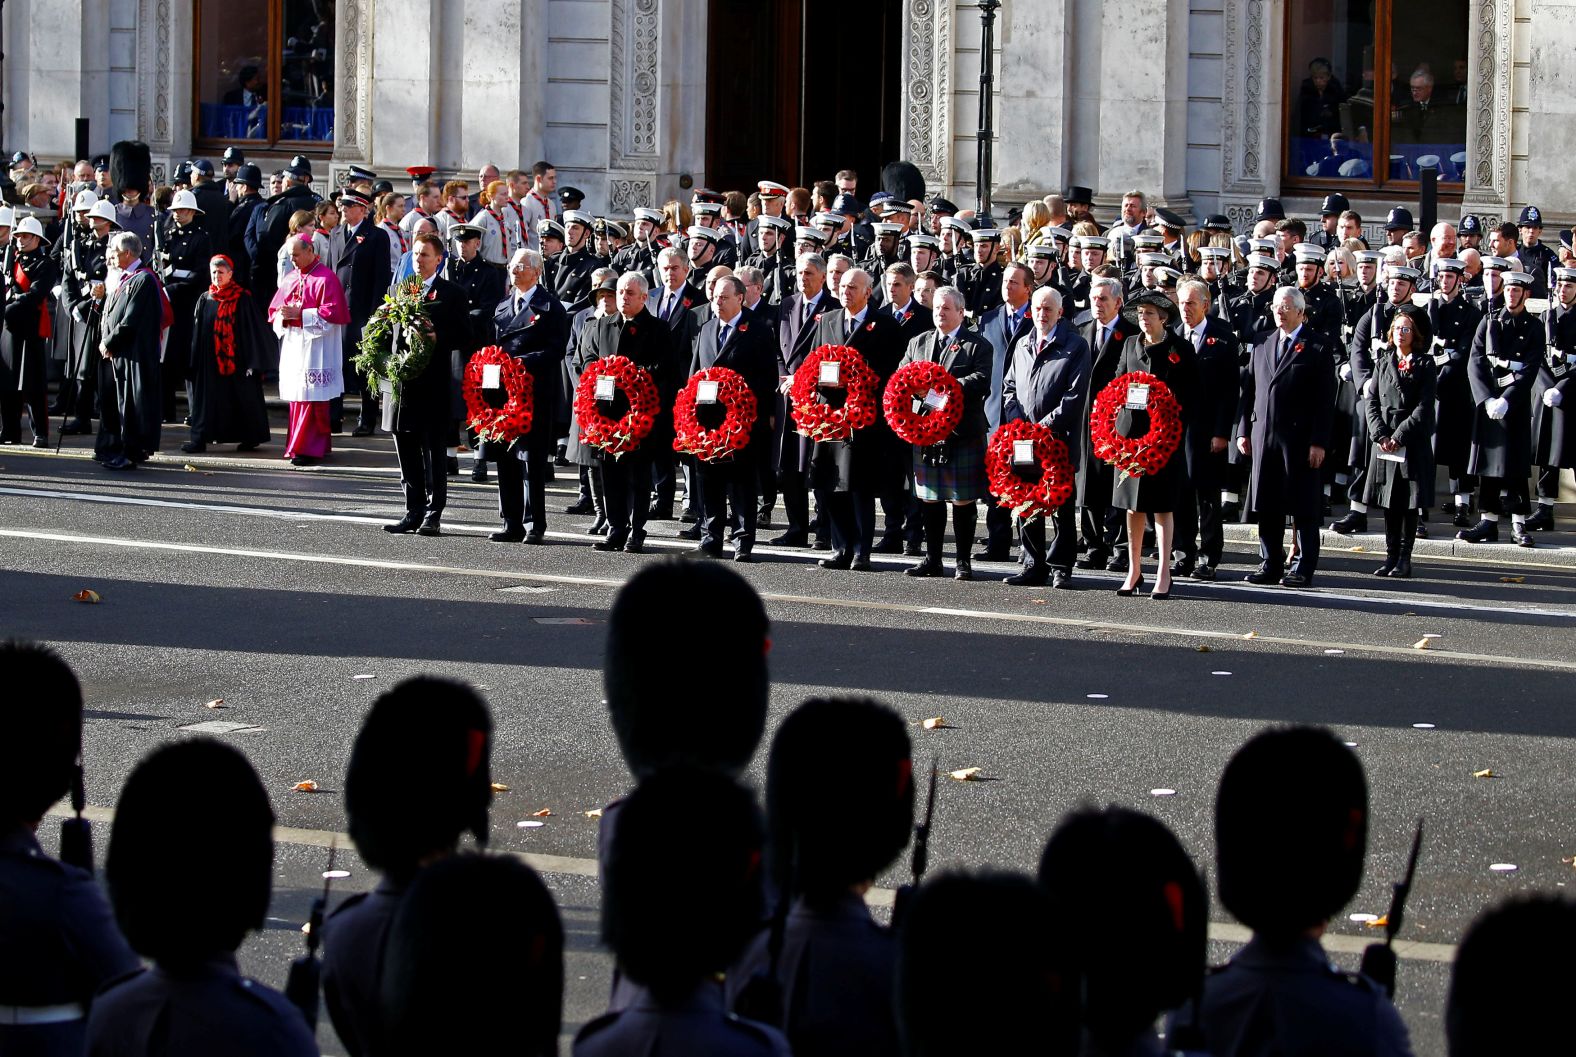 British Prime Minister Theresa May, other political leaders and ex-Prime Ministers stand in silence on Whitehall during a National Service of Remembrance at The Cenotaph in Westminster, London on Sunday.